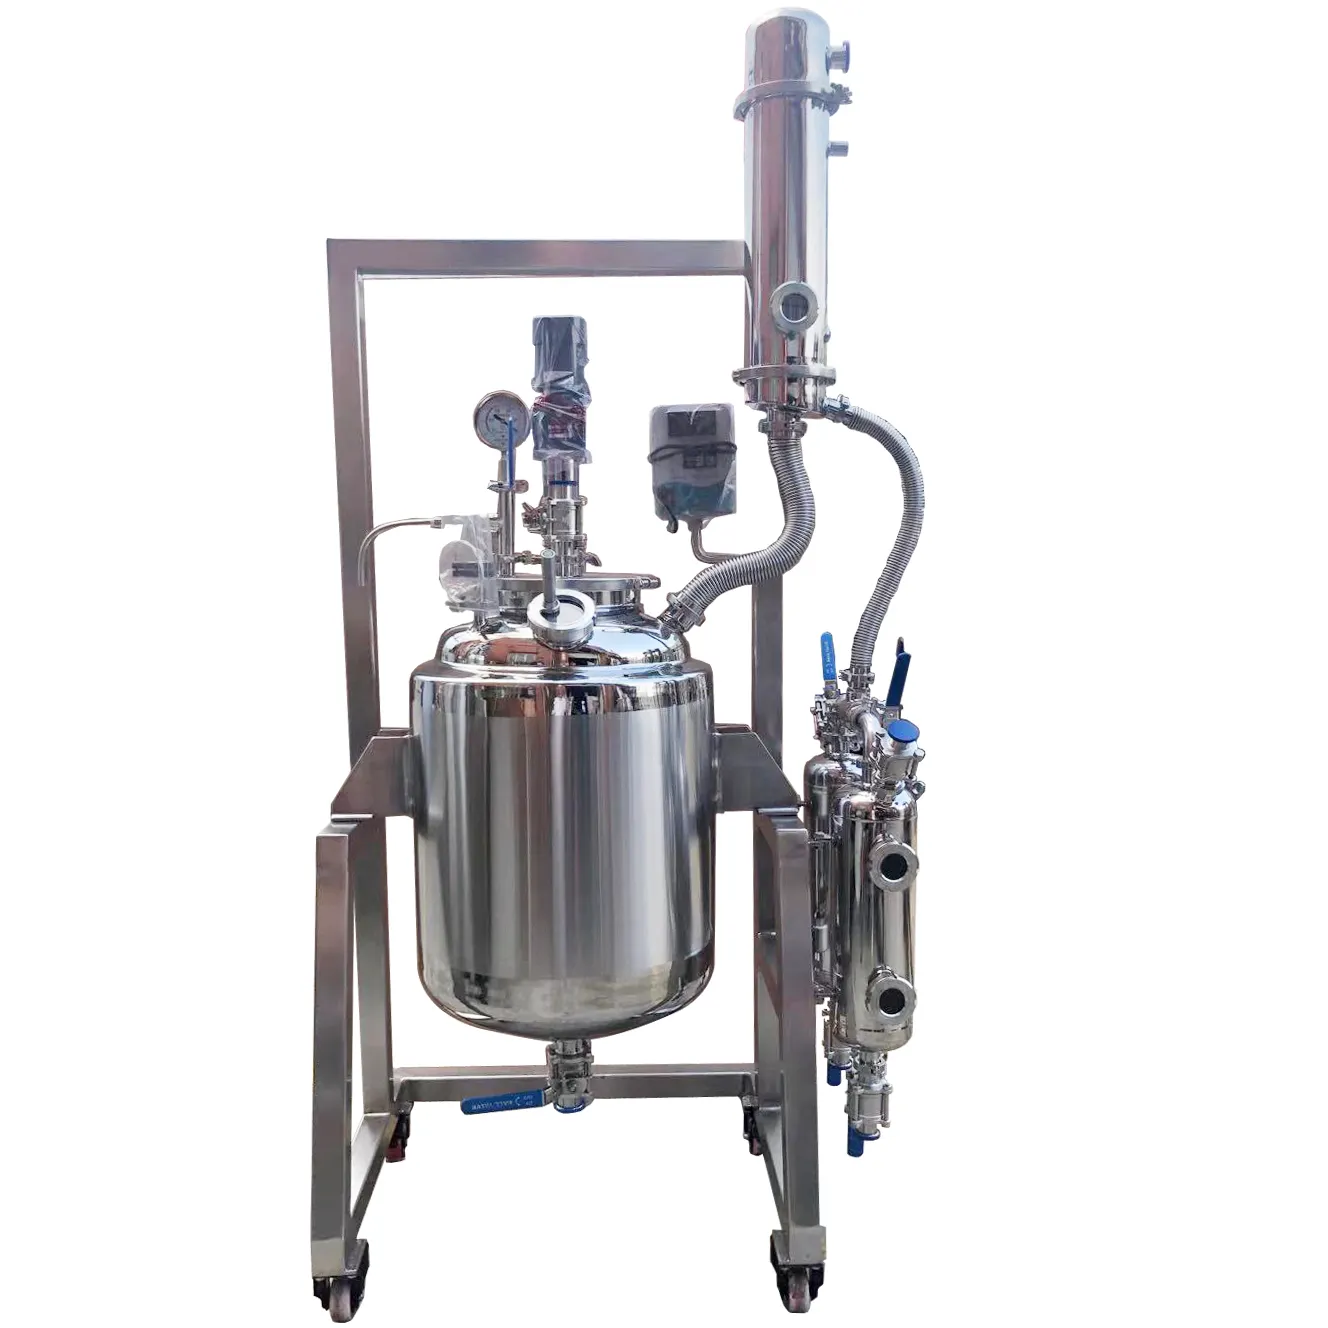 Stainless Steel Chemical Industrial reactor/ mixing tank